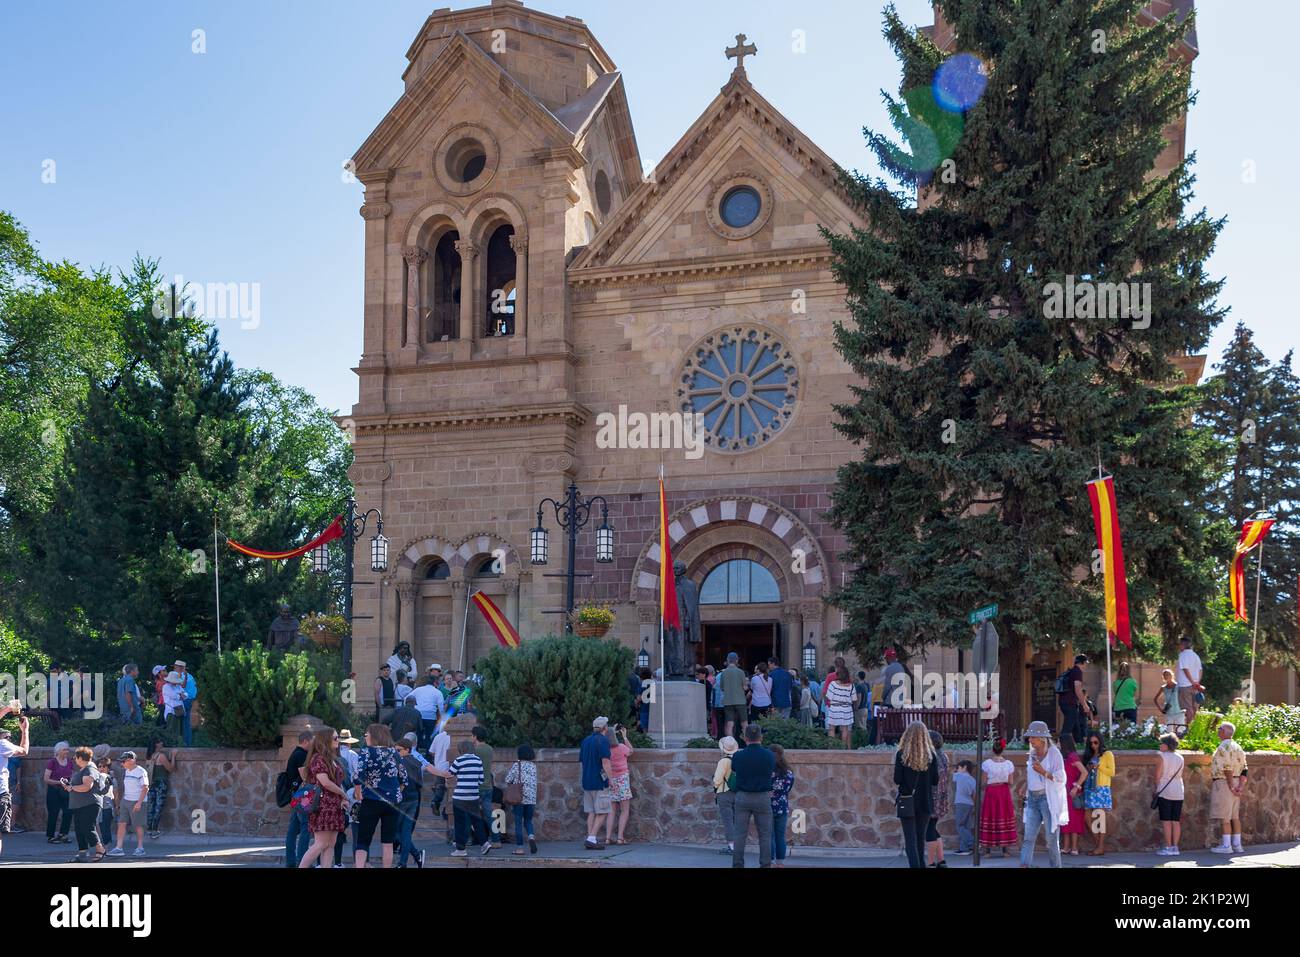 Crowd in front of St. Francis Cathedral wait for the ceremonial procession to arrive during the Fiesta de Santa Fe, Santa Fe, New Mexico. Stock Photo